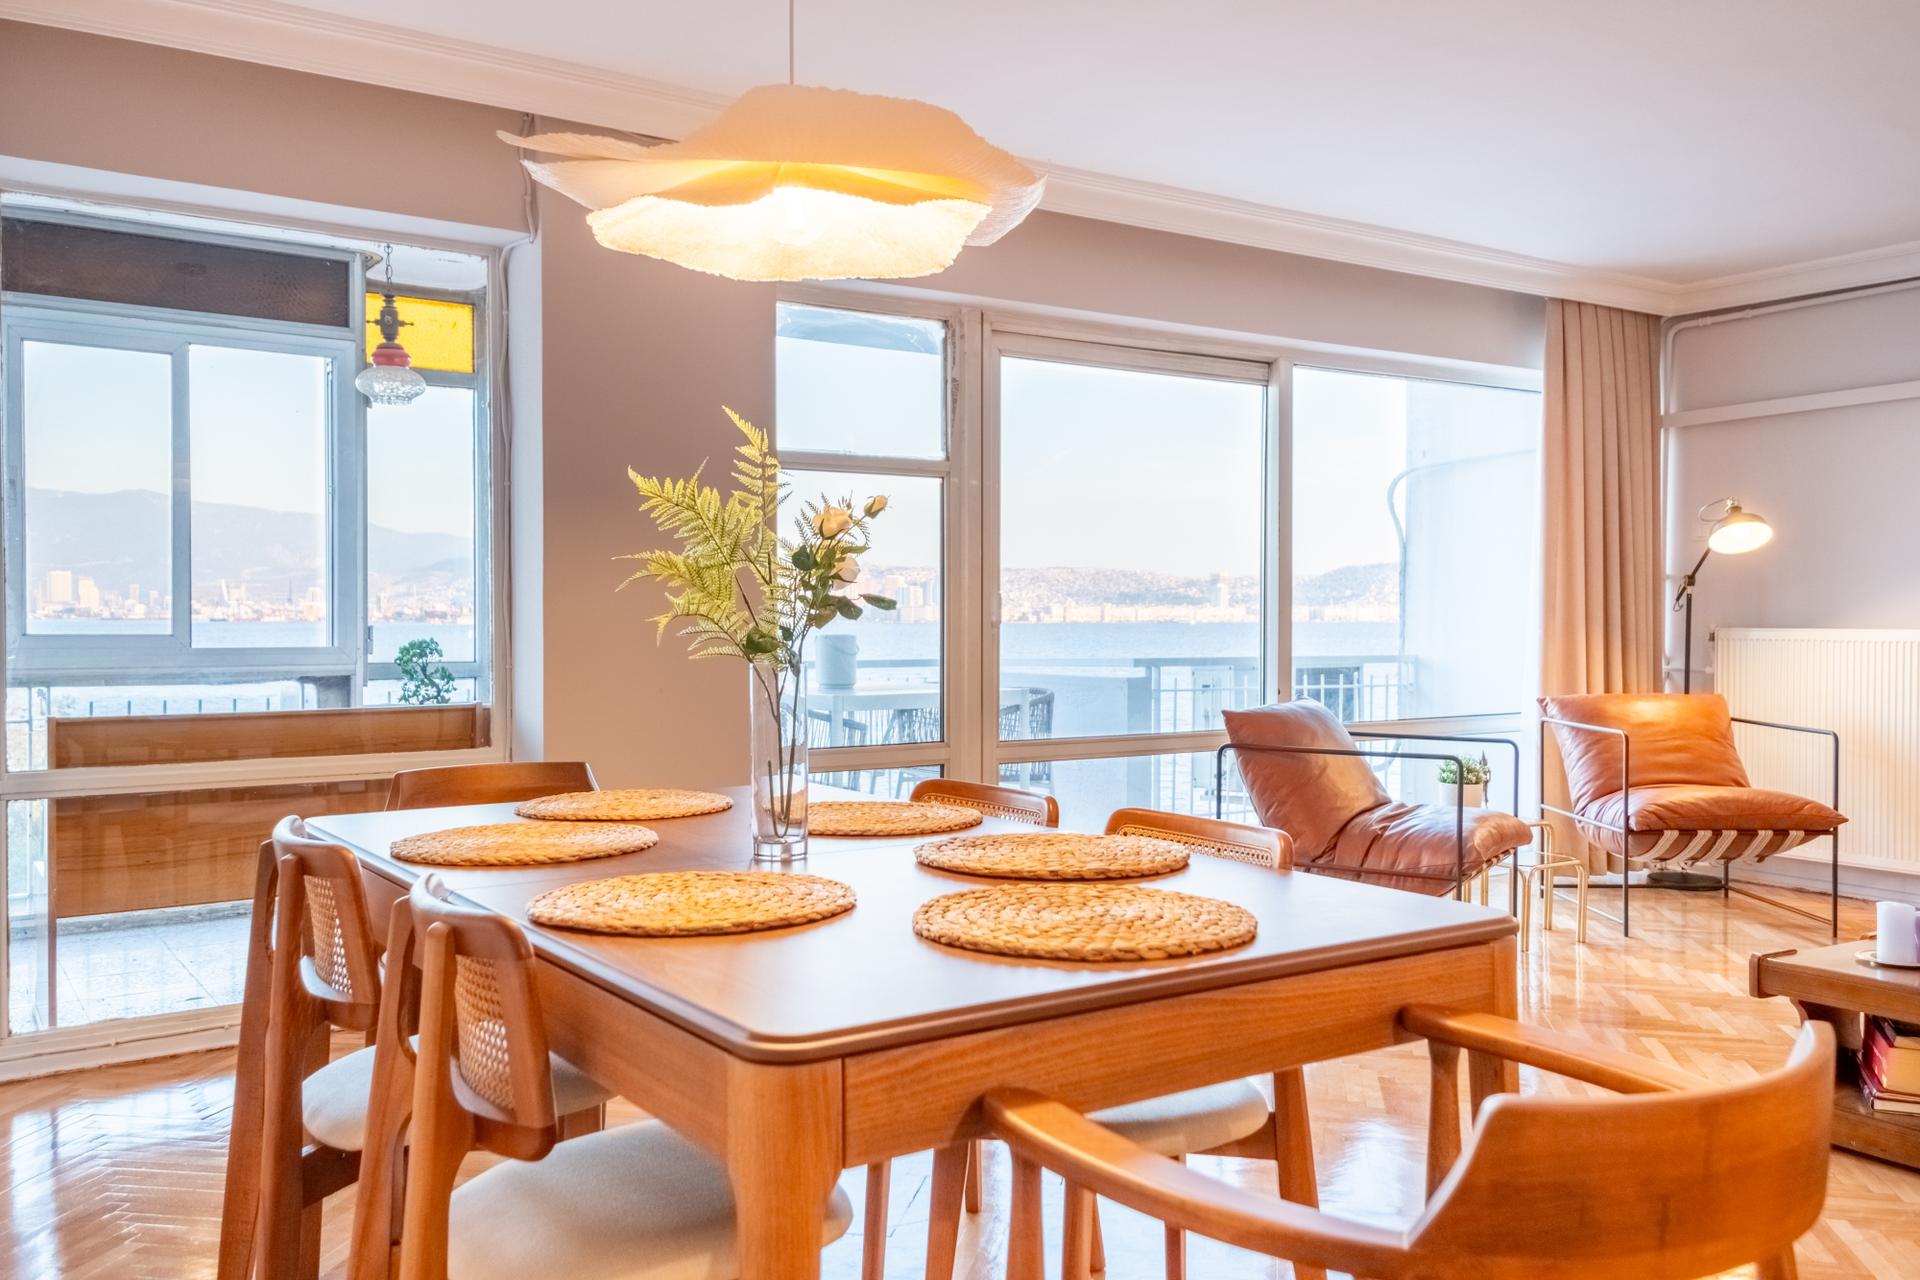  You can enjoy delicious meals with your loved ones at the large dining table in the room.